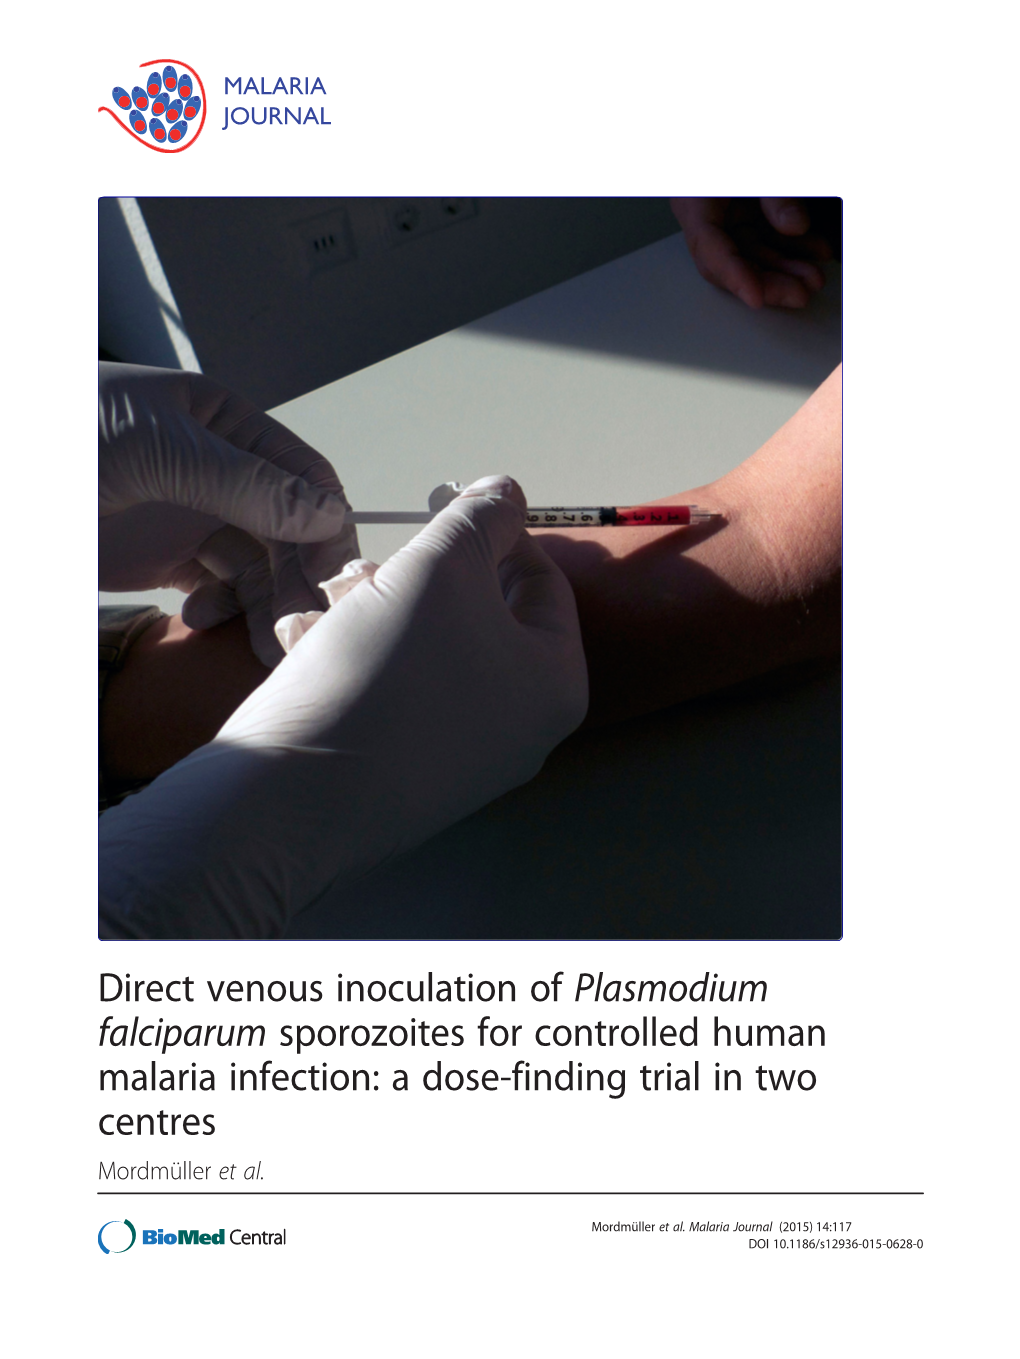 Direct Venous Inoculation of Plasmodium Falciparum Sporozoites for Controlled Human Malaria Infection: a Dose-Finding Trial in Two Centres Mordmüller Et Al